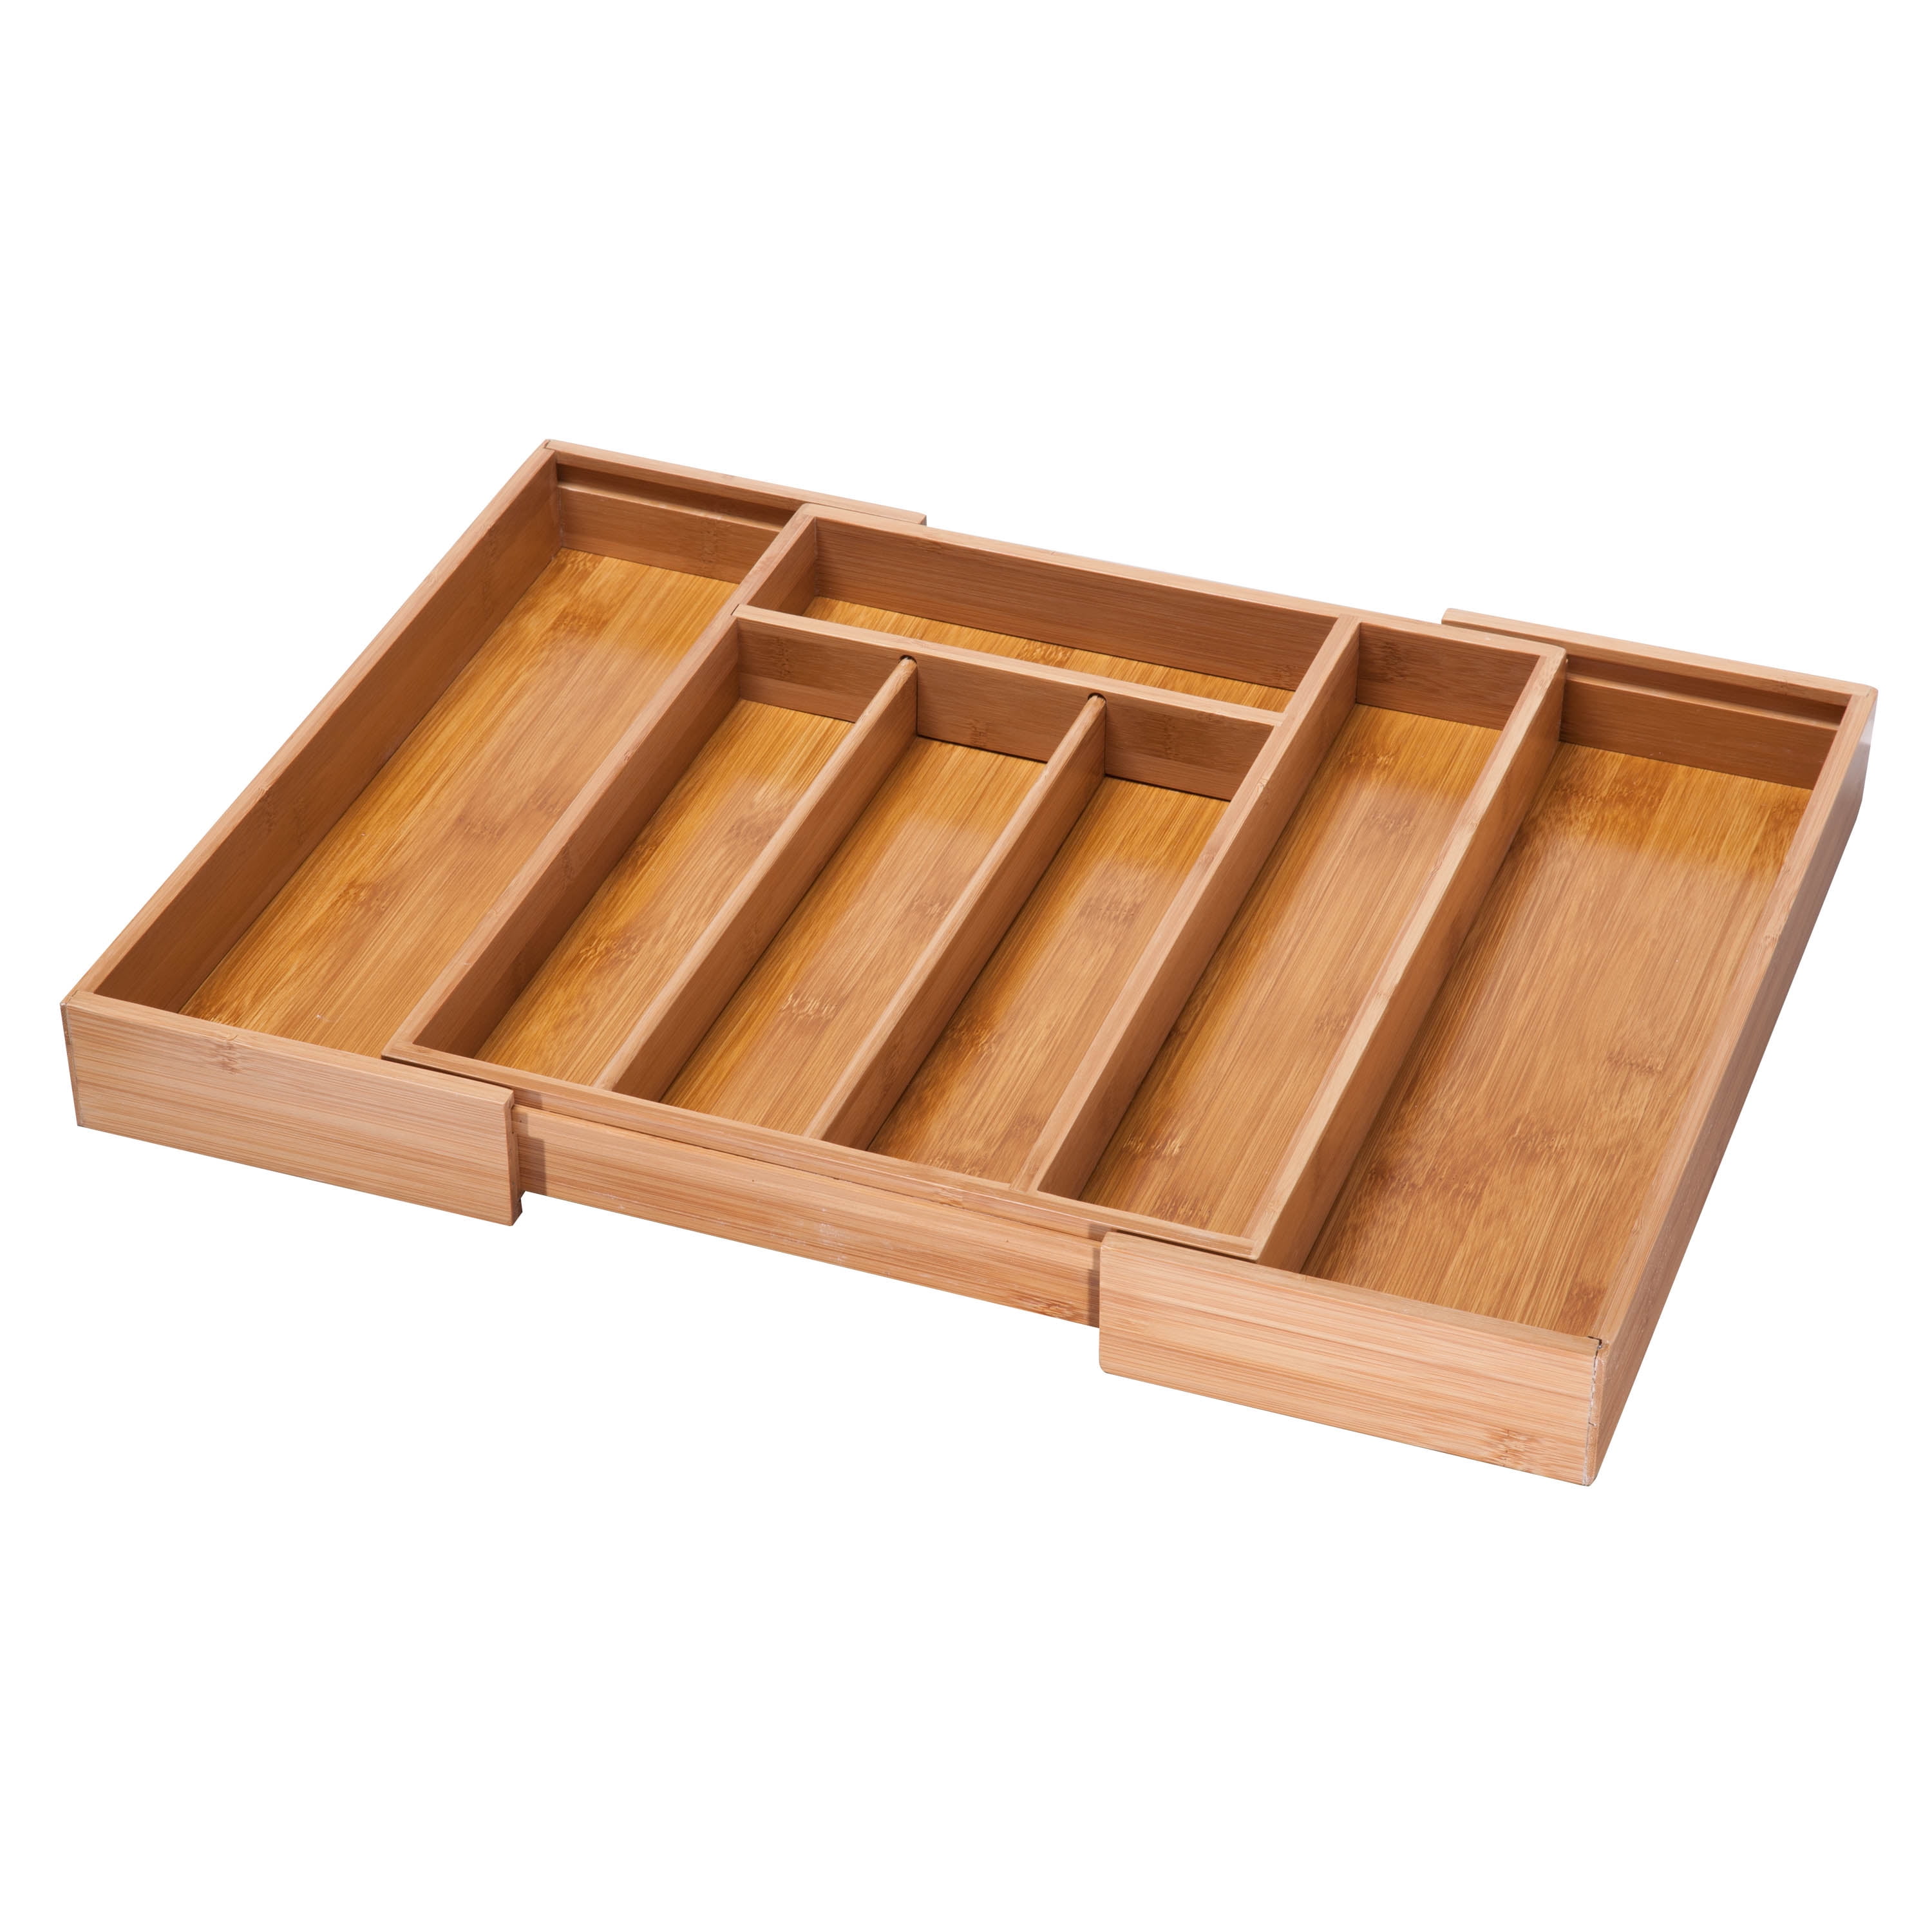 Cutlery Tray Drawer Utensils Compartment Bamboo 46x43x5cm extensible Cutlery Organizer